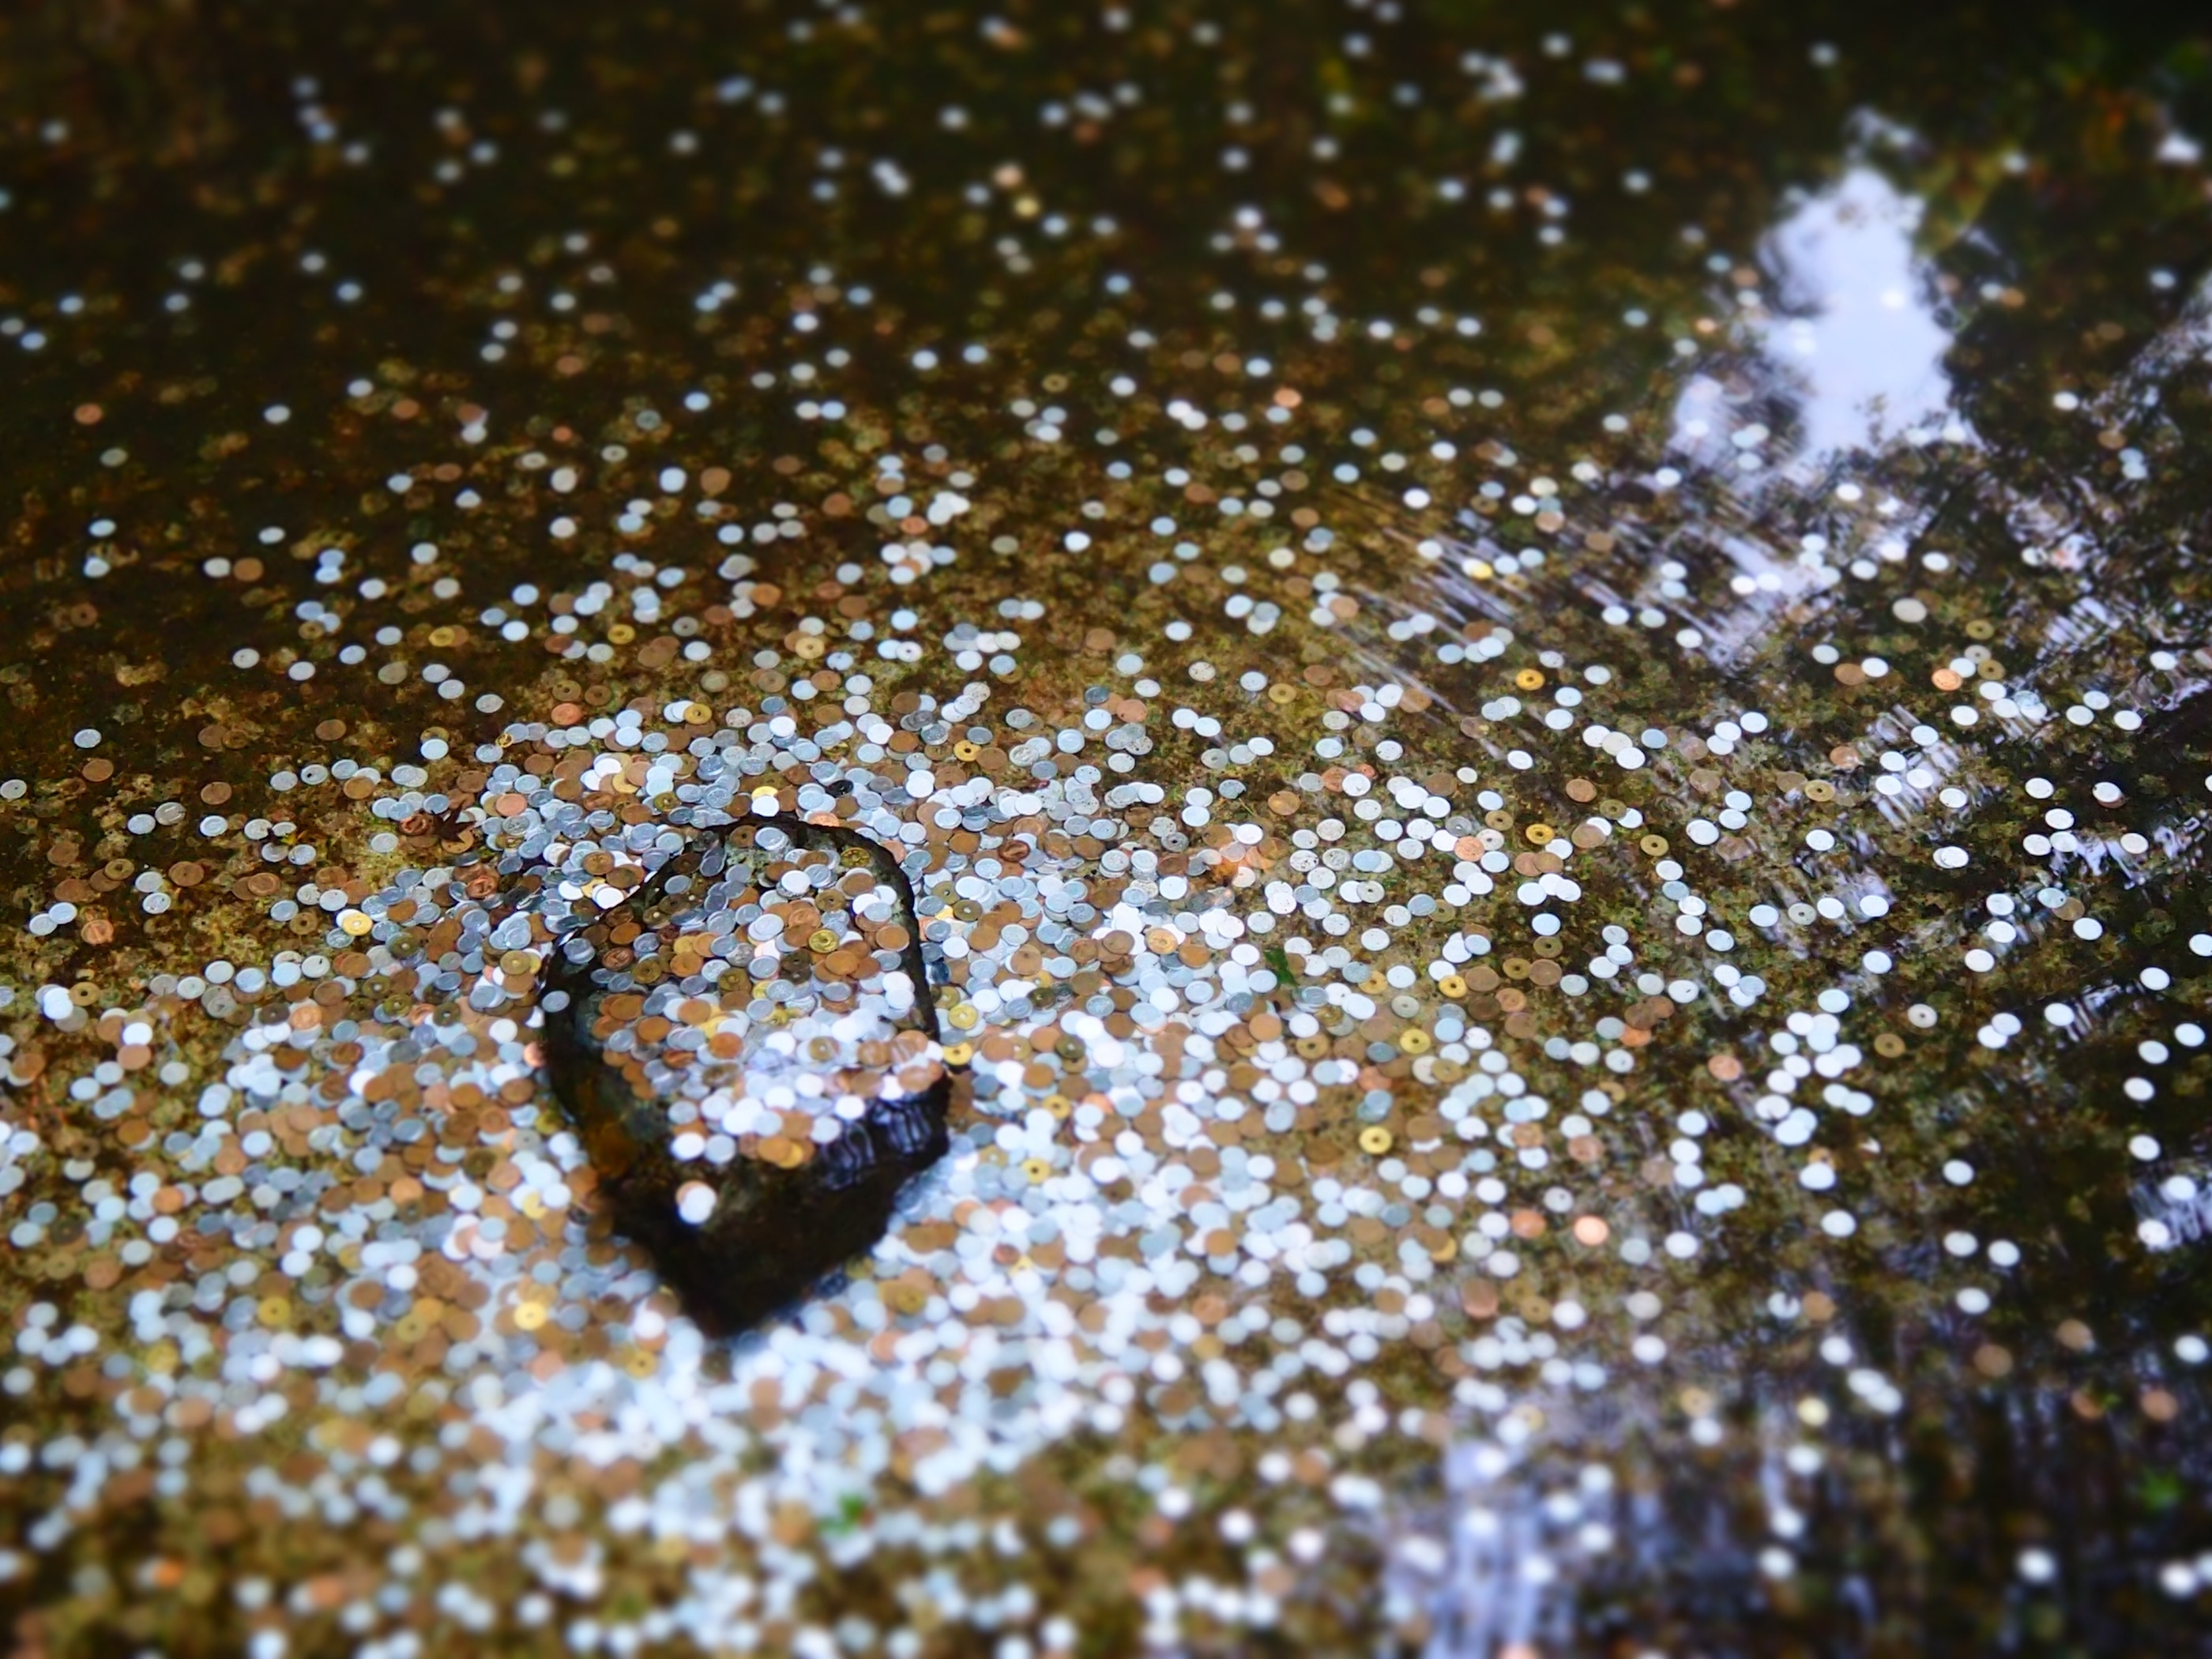 Coins in a wishing well